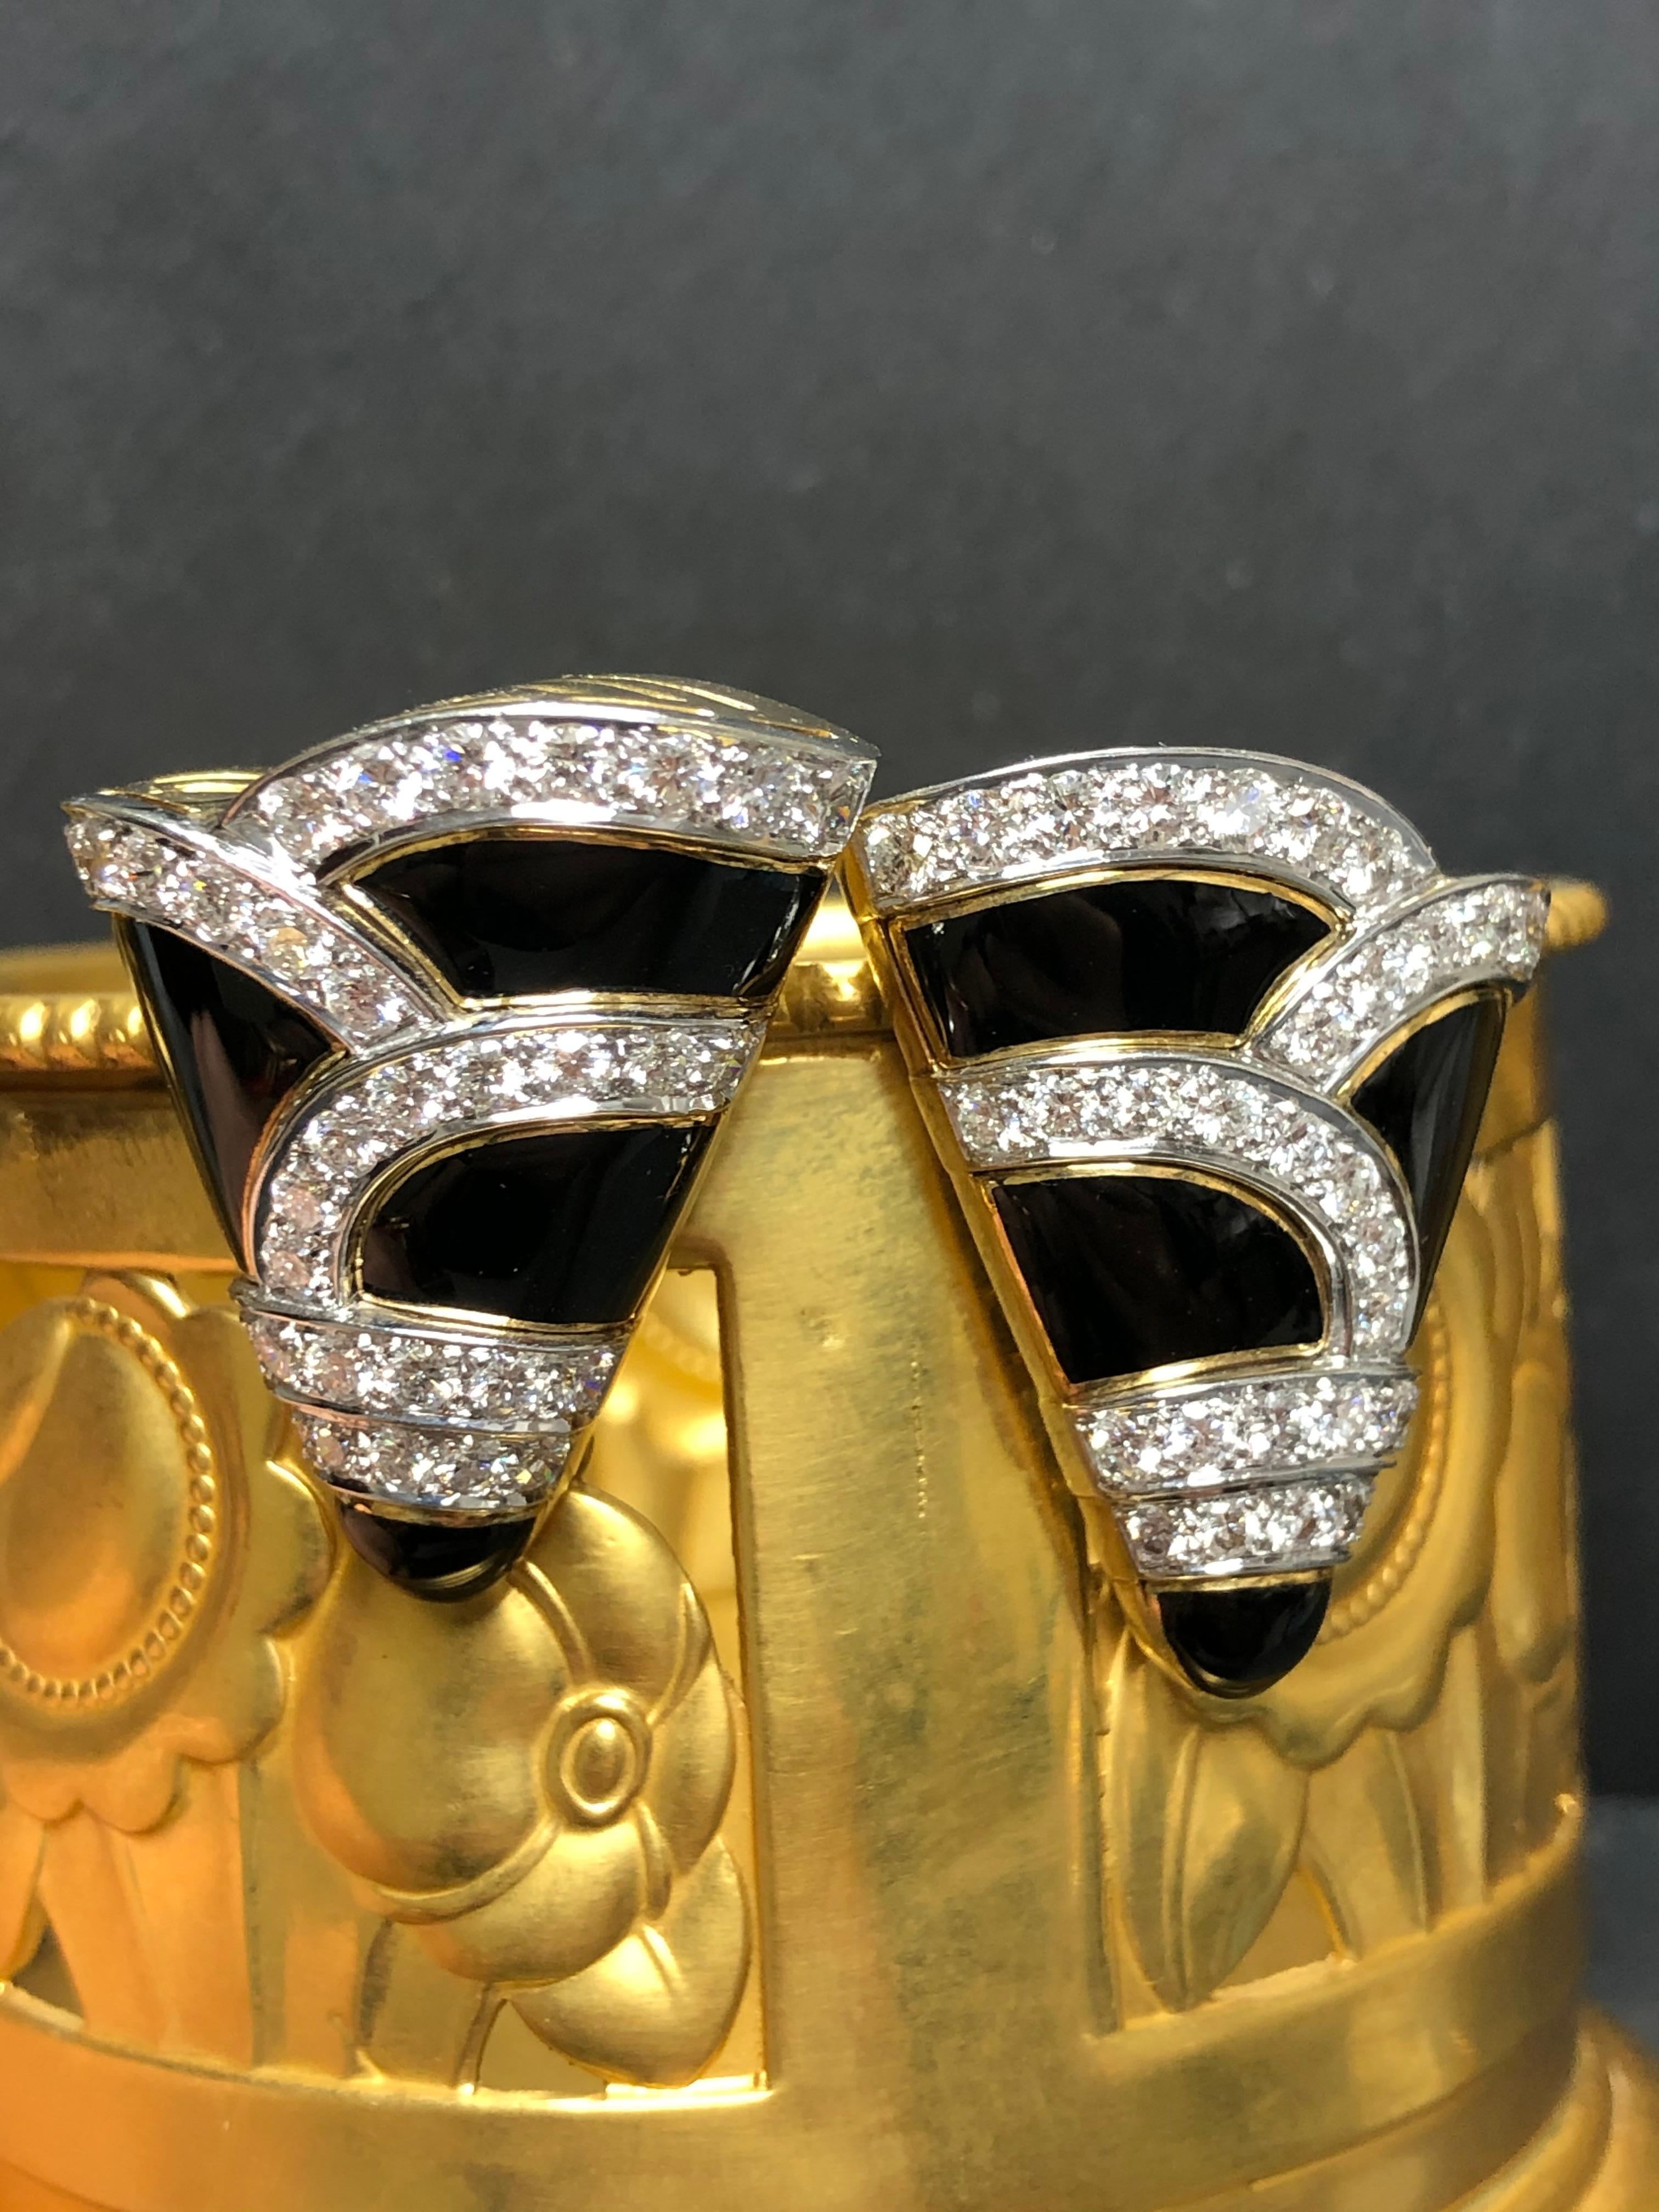 
An incredible pair of earrings that have no excuses to be made. They are done in 18K yellow gold and platinum and set with approximately 4cttw in perfectly cut and matched F+ color and Vs1+ clarity round diamonds. The enamel portions are made